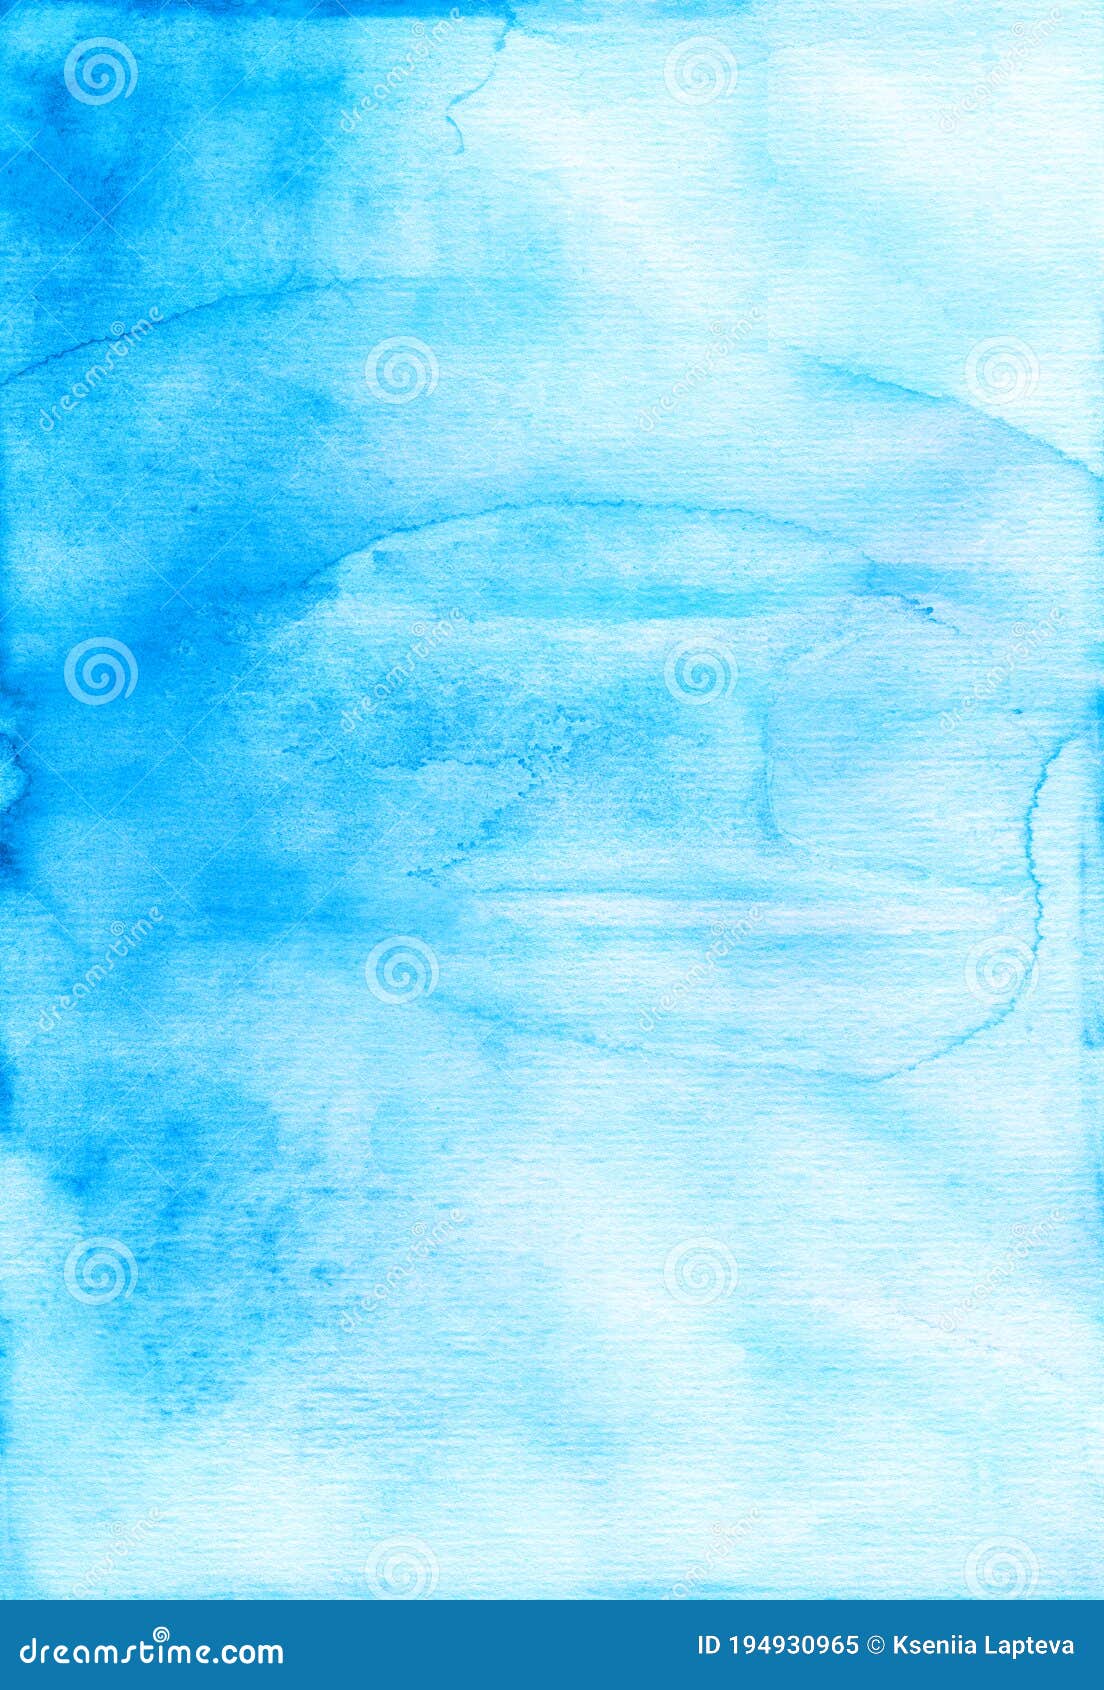 Watercolor Old Light Blue and White Gradient Background Texture. Pastel Sky Blue  Color Stains on Paper Stock Image - Image of contemporary, brush: 194930965